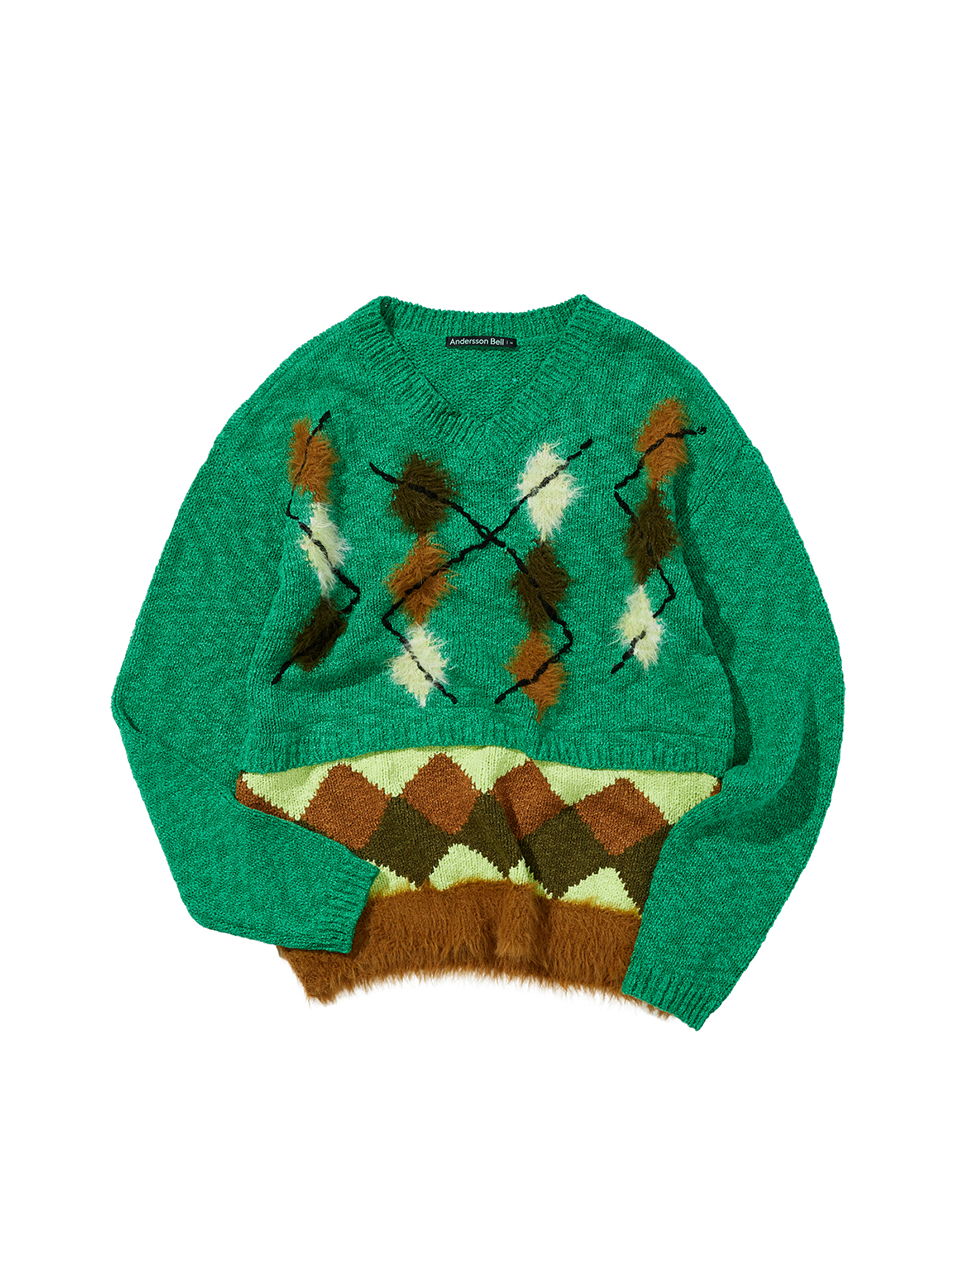 ANDERSSON BELL - ARGYLE LAYERED V-NECK SWEATER (GREEN)